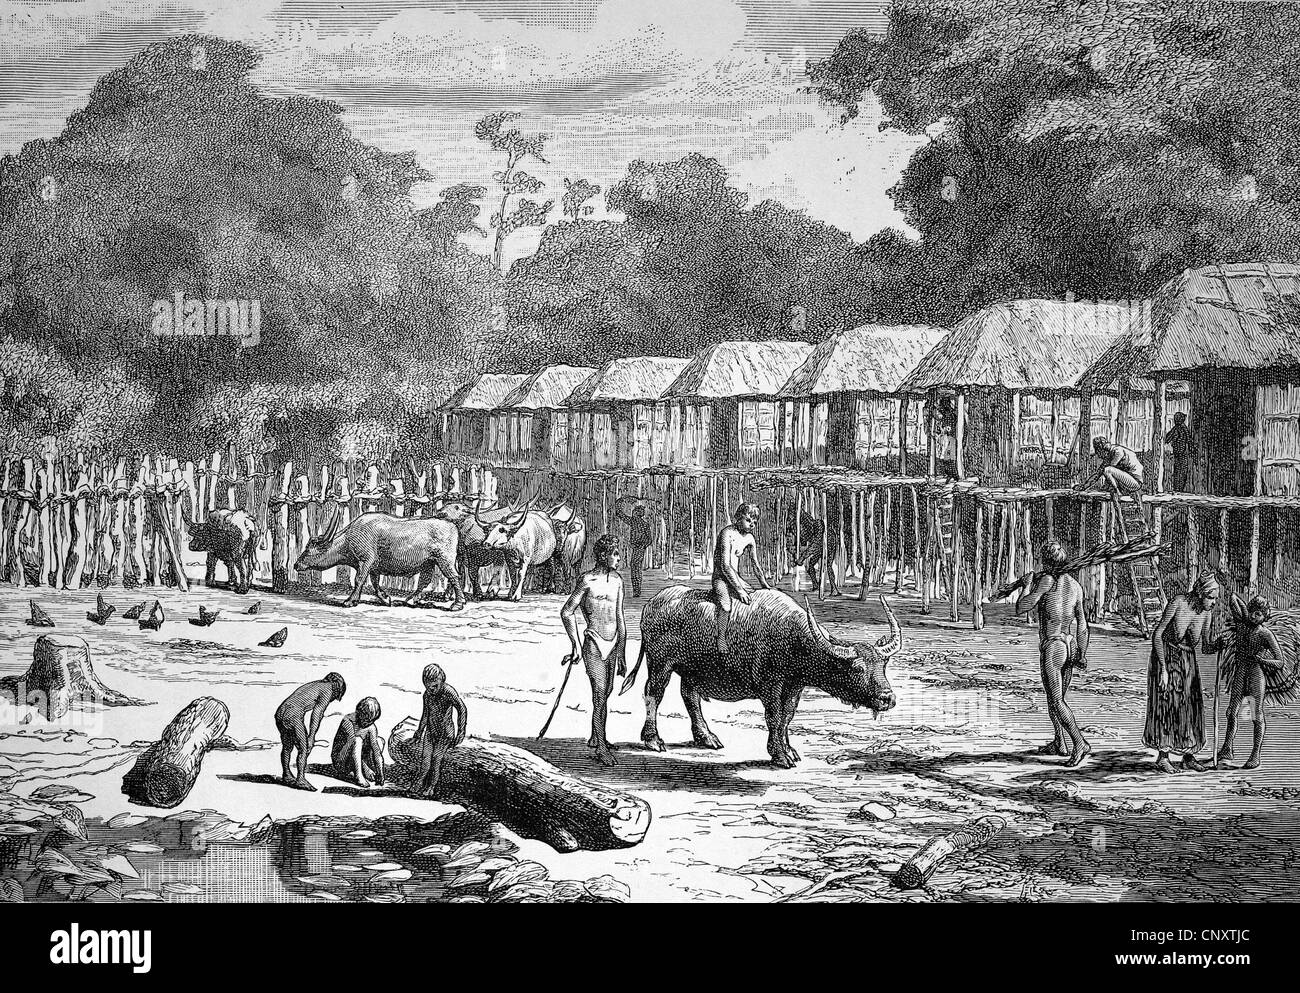 Country scene in Laos, historical illustration, wood engraving, circa 1888 Stock Photo